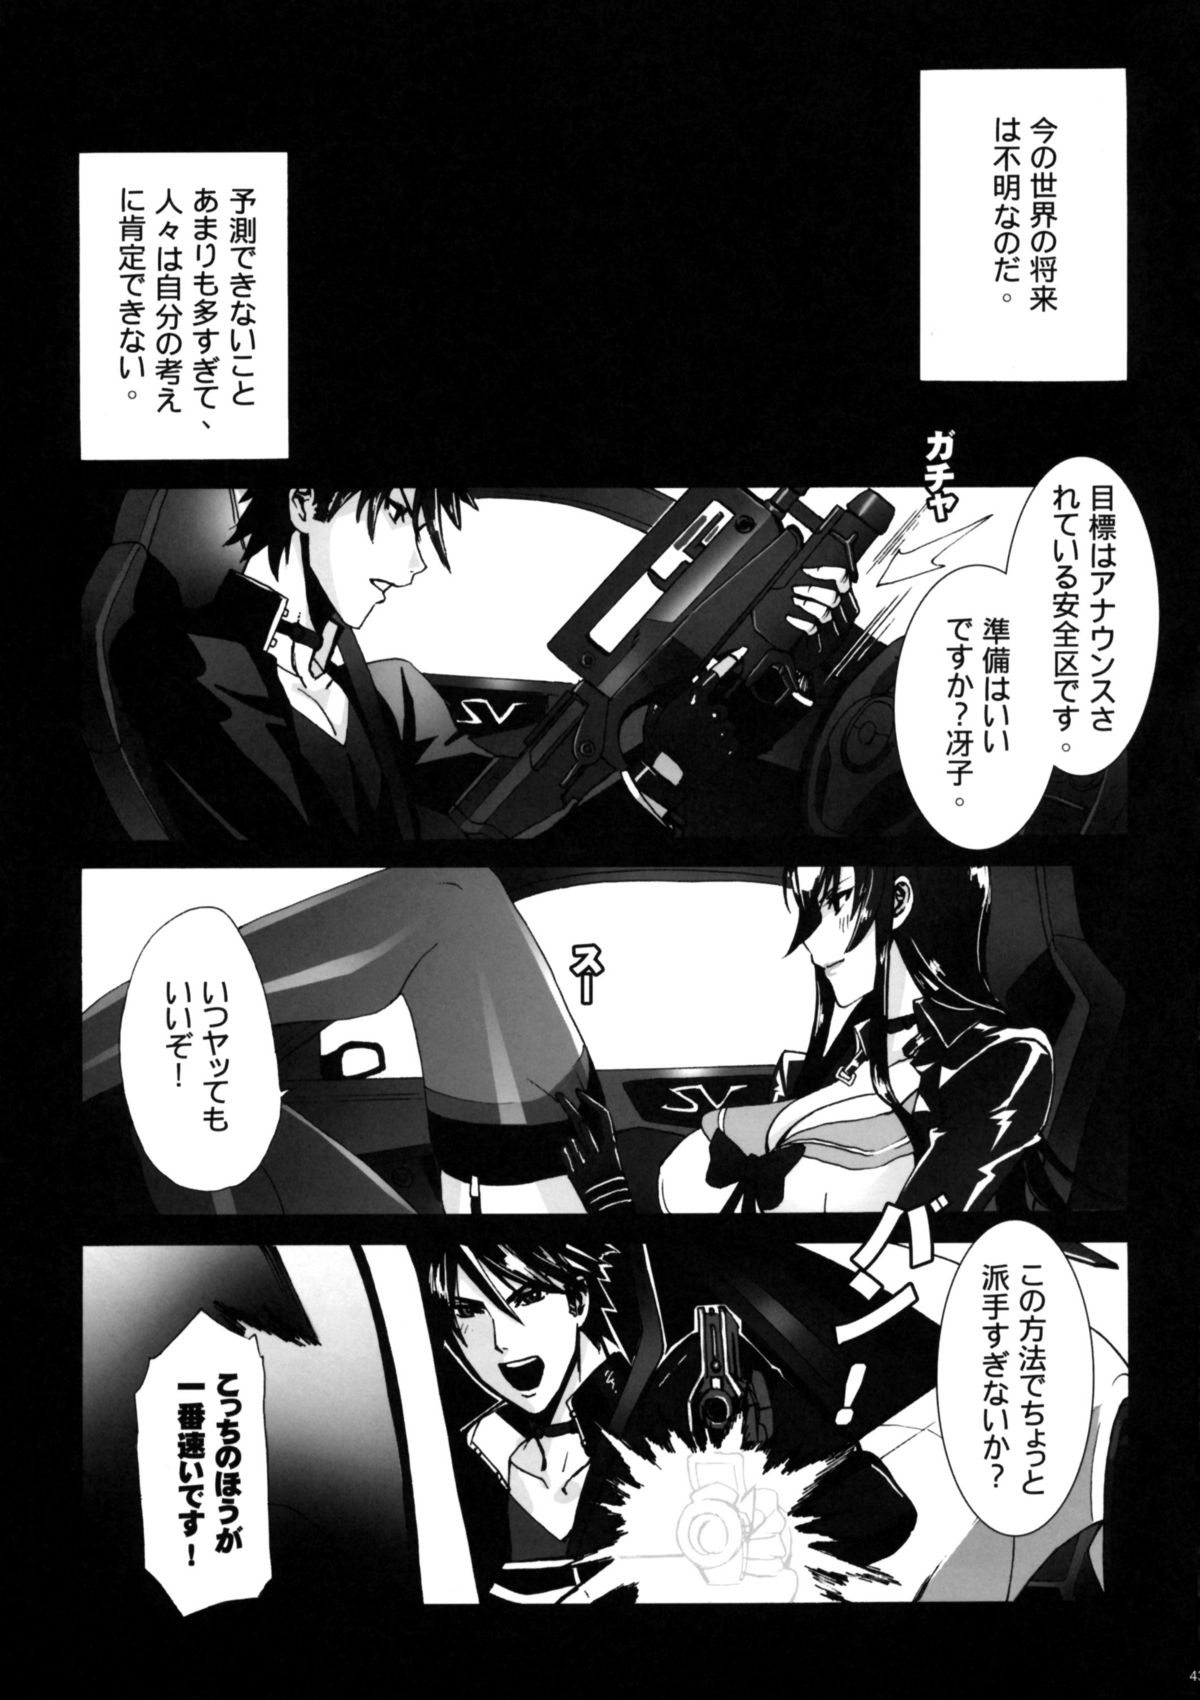 (C79) [Maidoll (Fei)] Kiss of the Dead (Highschool of the Dead) page 43 full